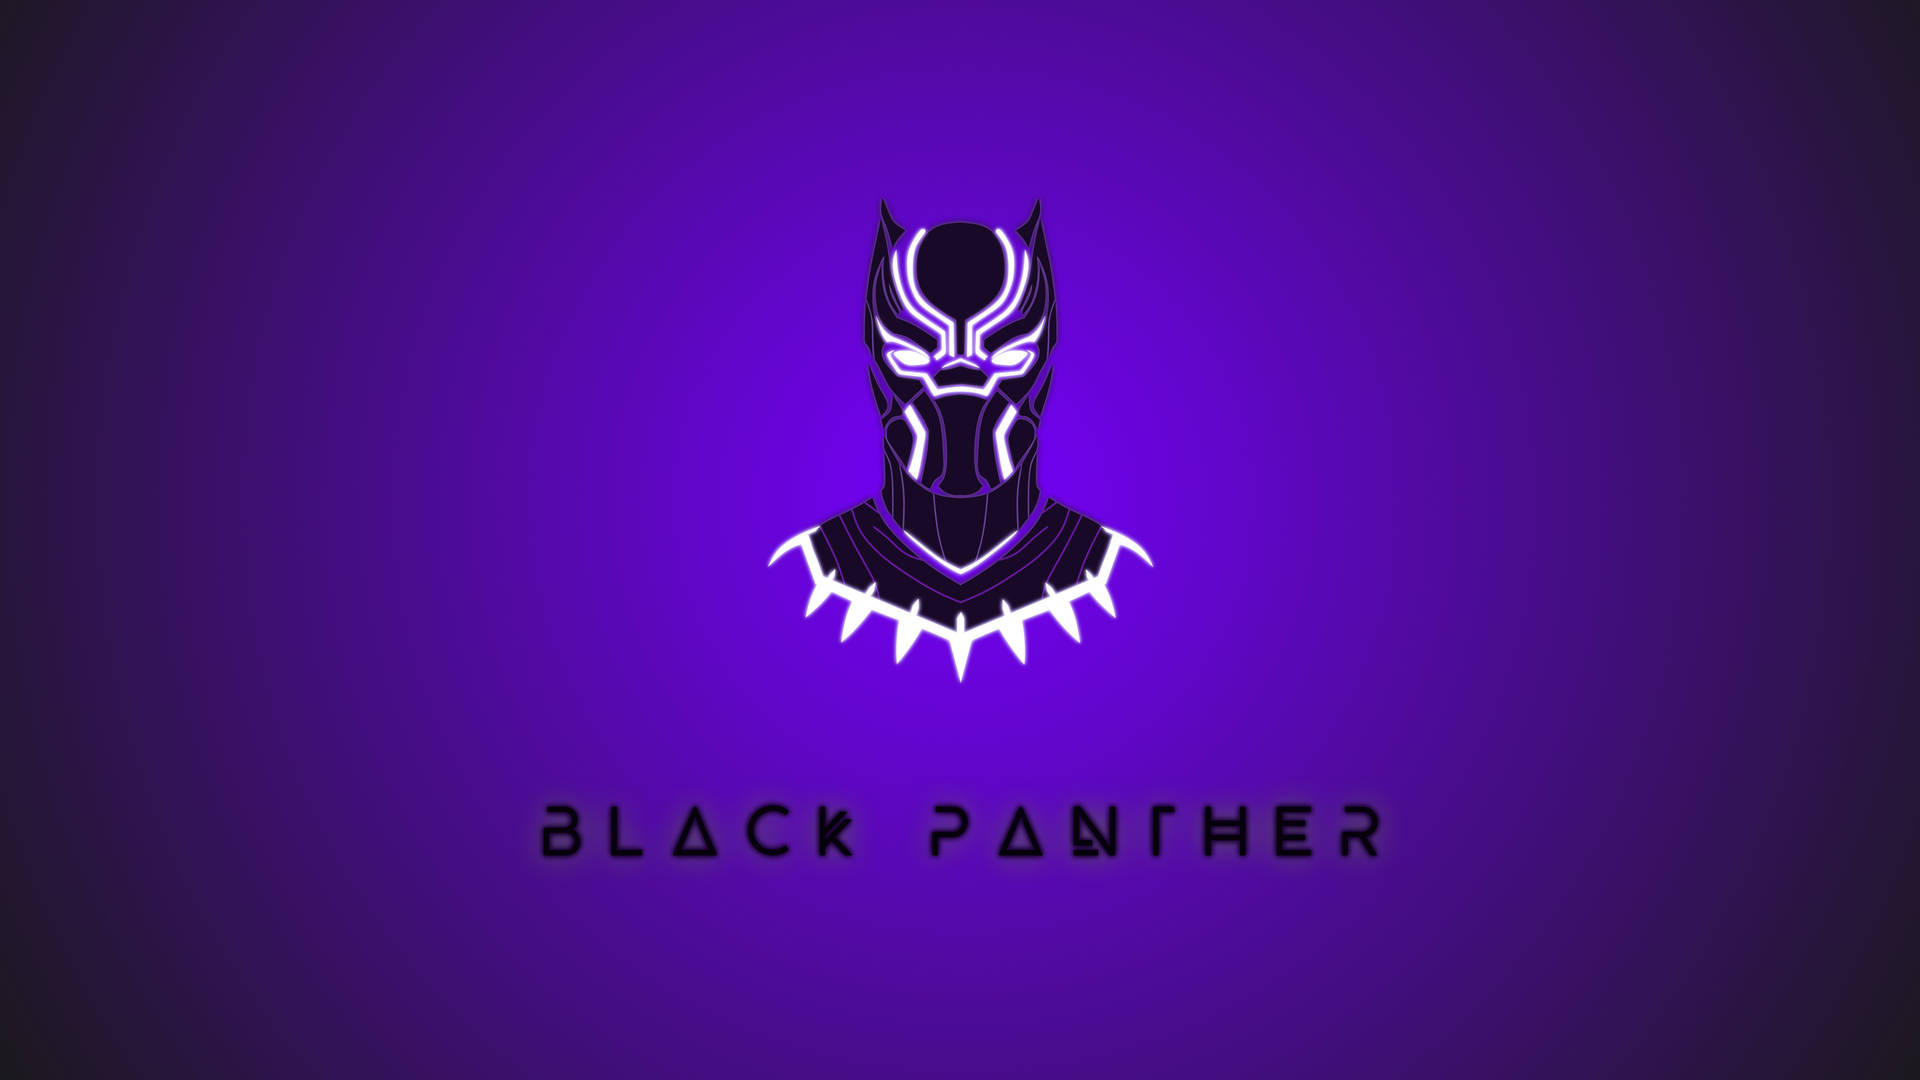 Black Panther 4k Ultra Hd Dark Graphic Art Picture